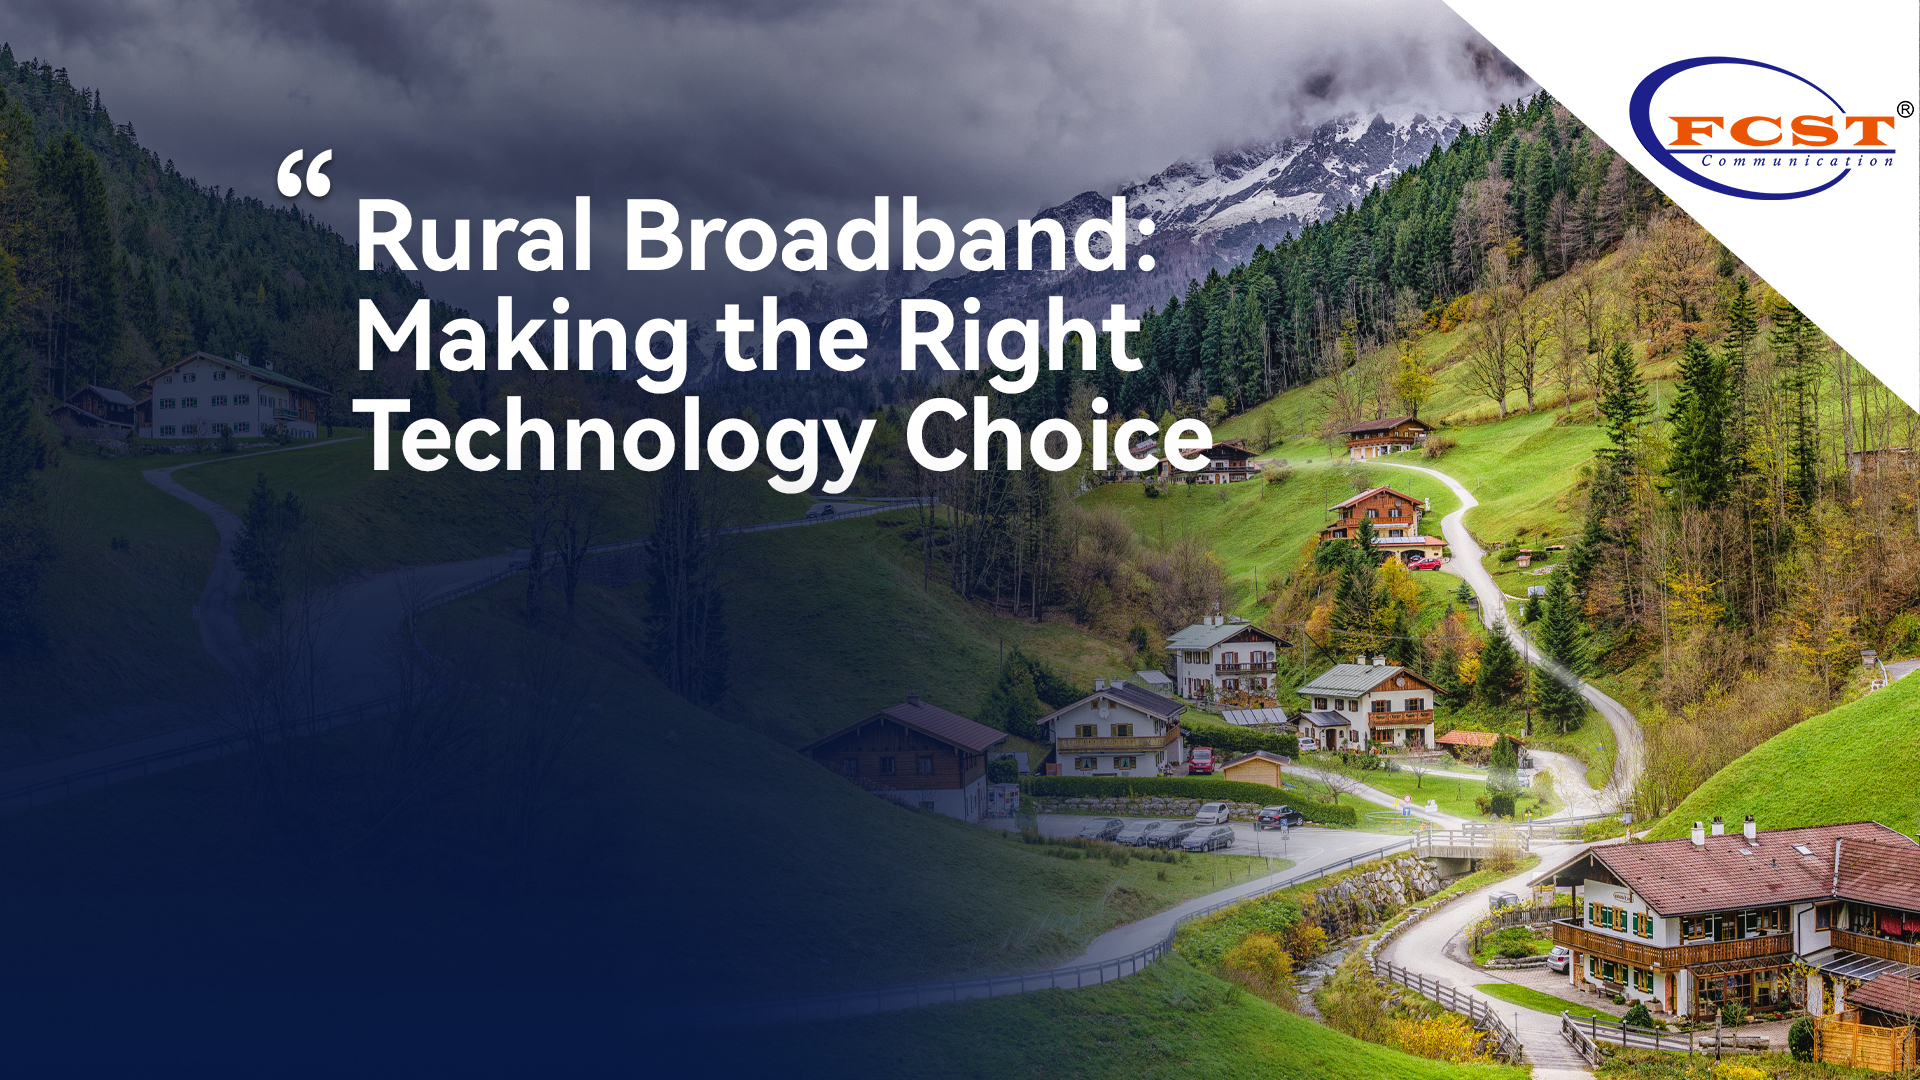 Rural Broadband: Making the Right Technology Choice